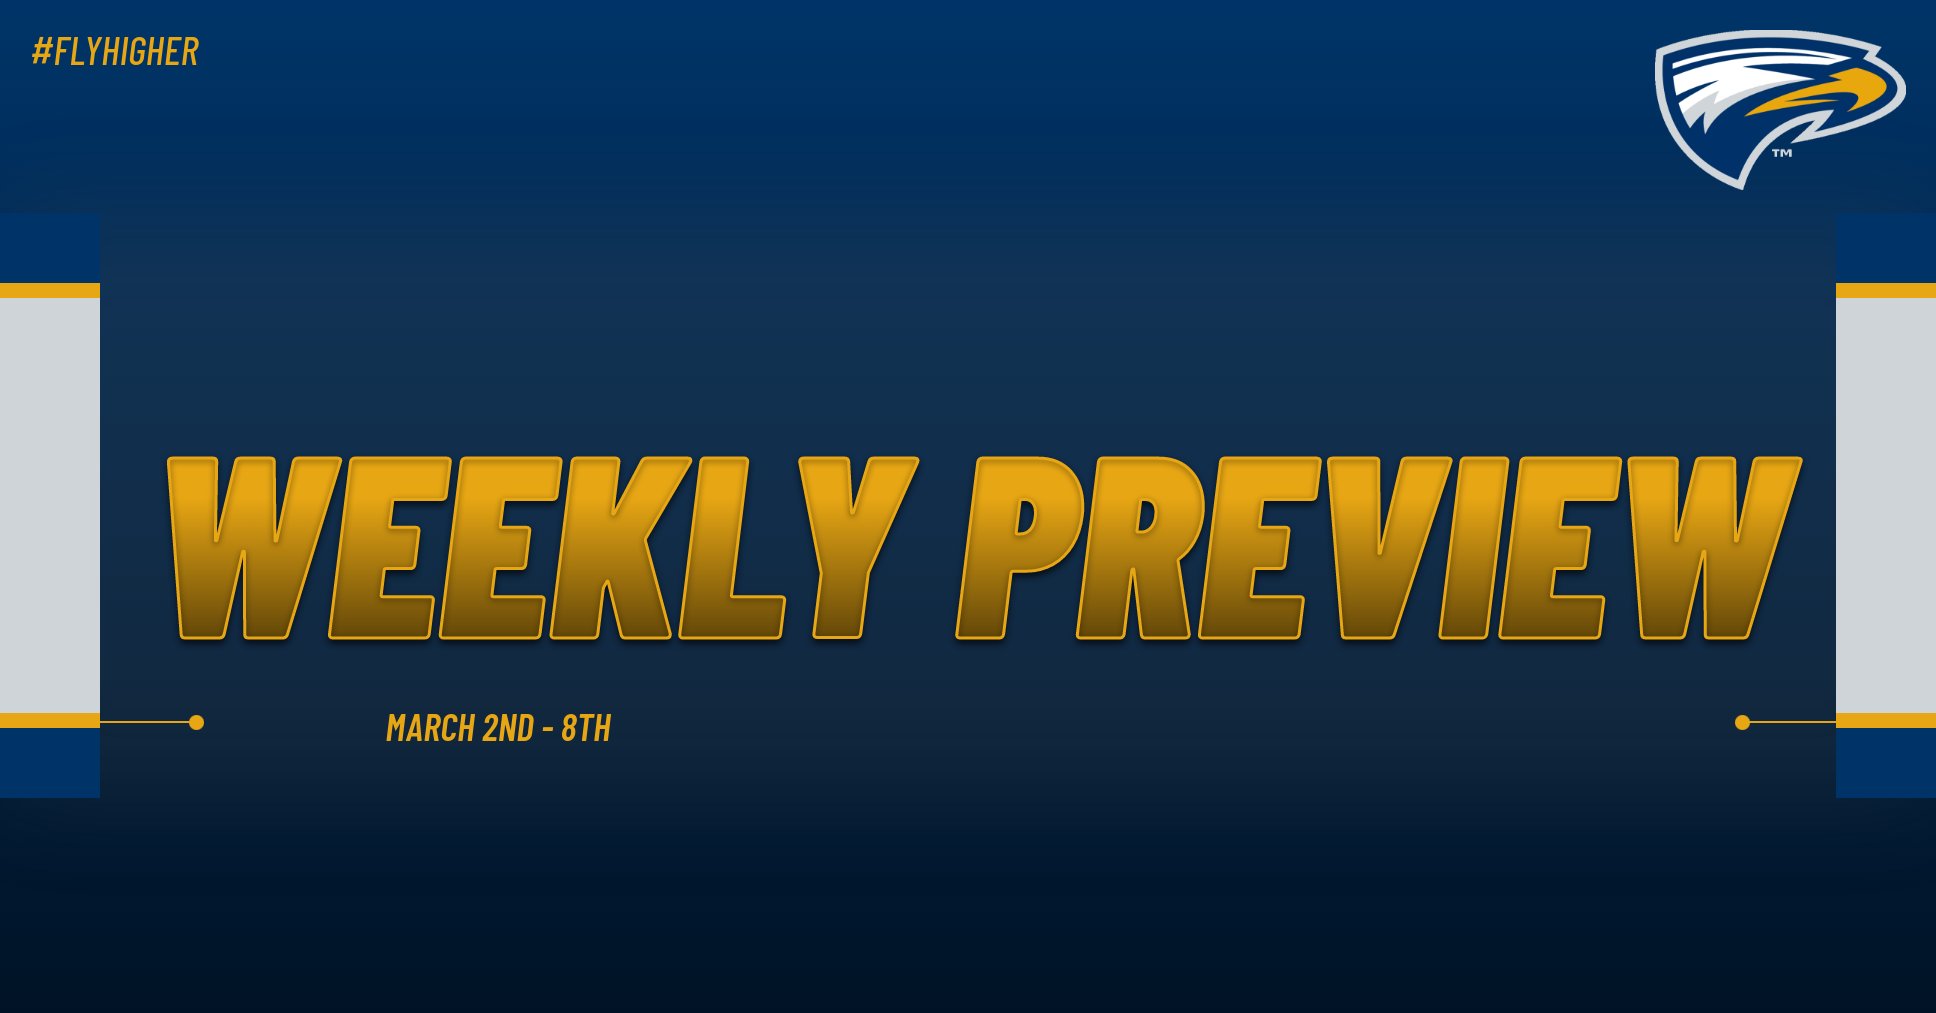 Emory Athletics Weekly Preview - March 2nd - 8th